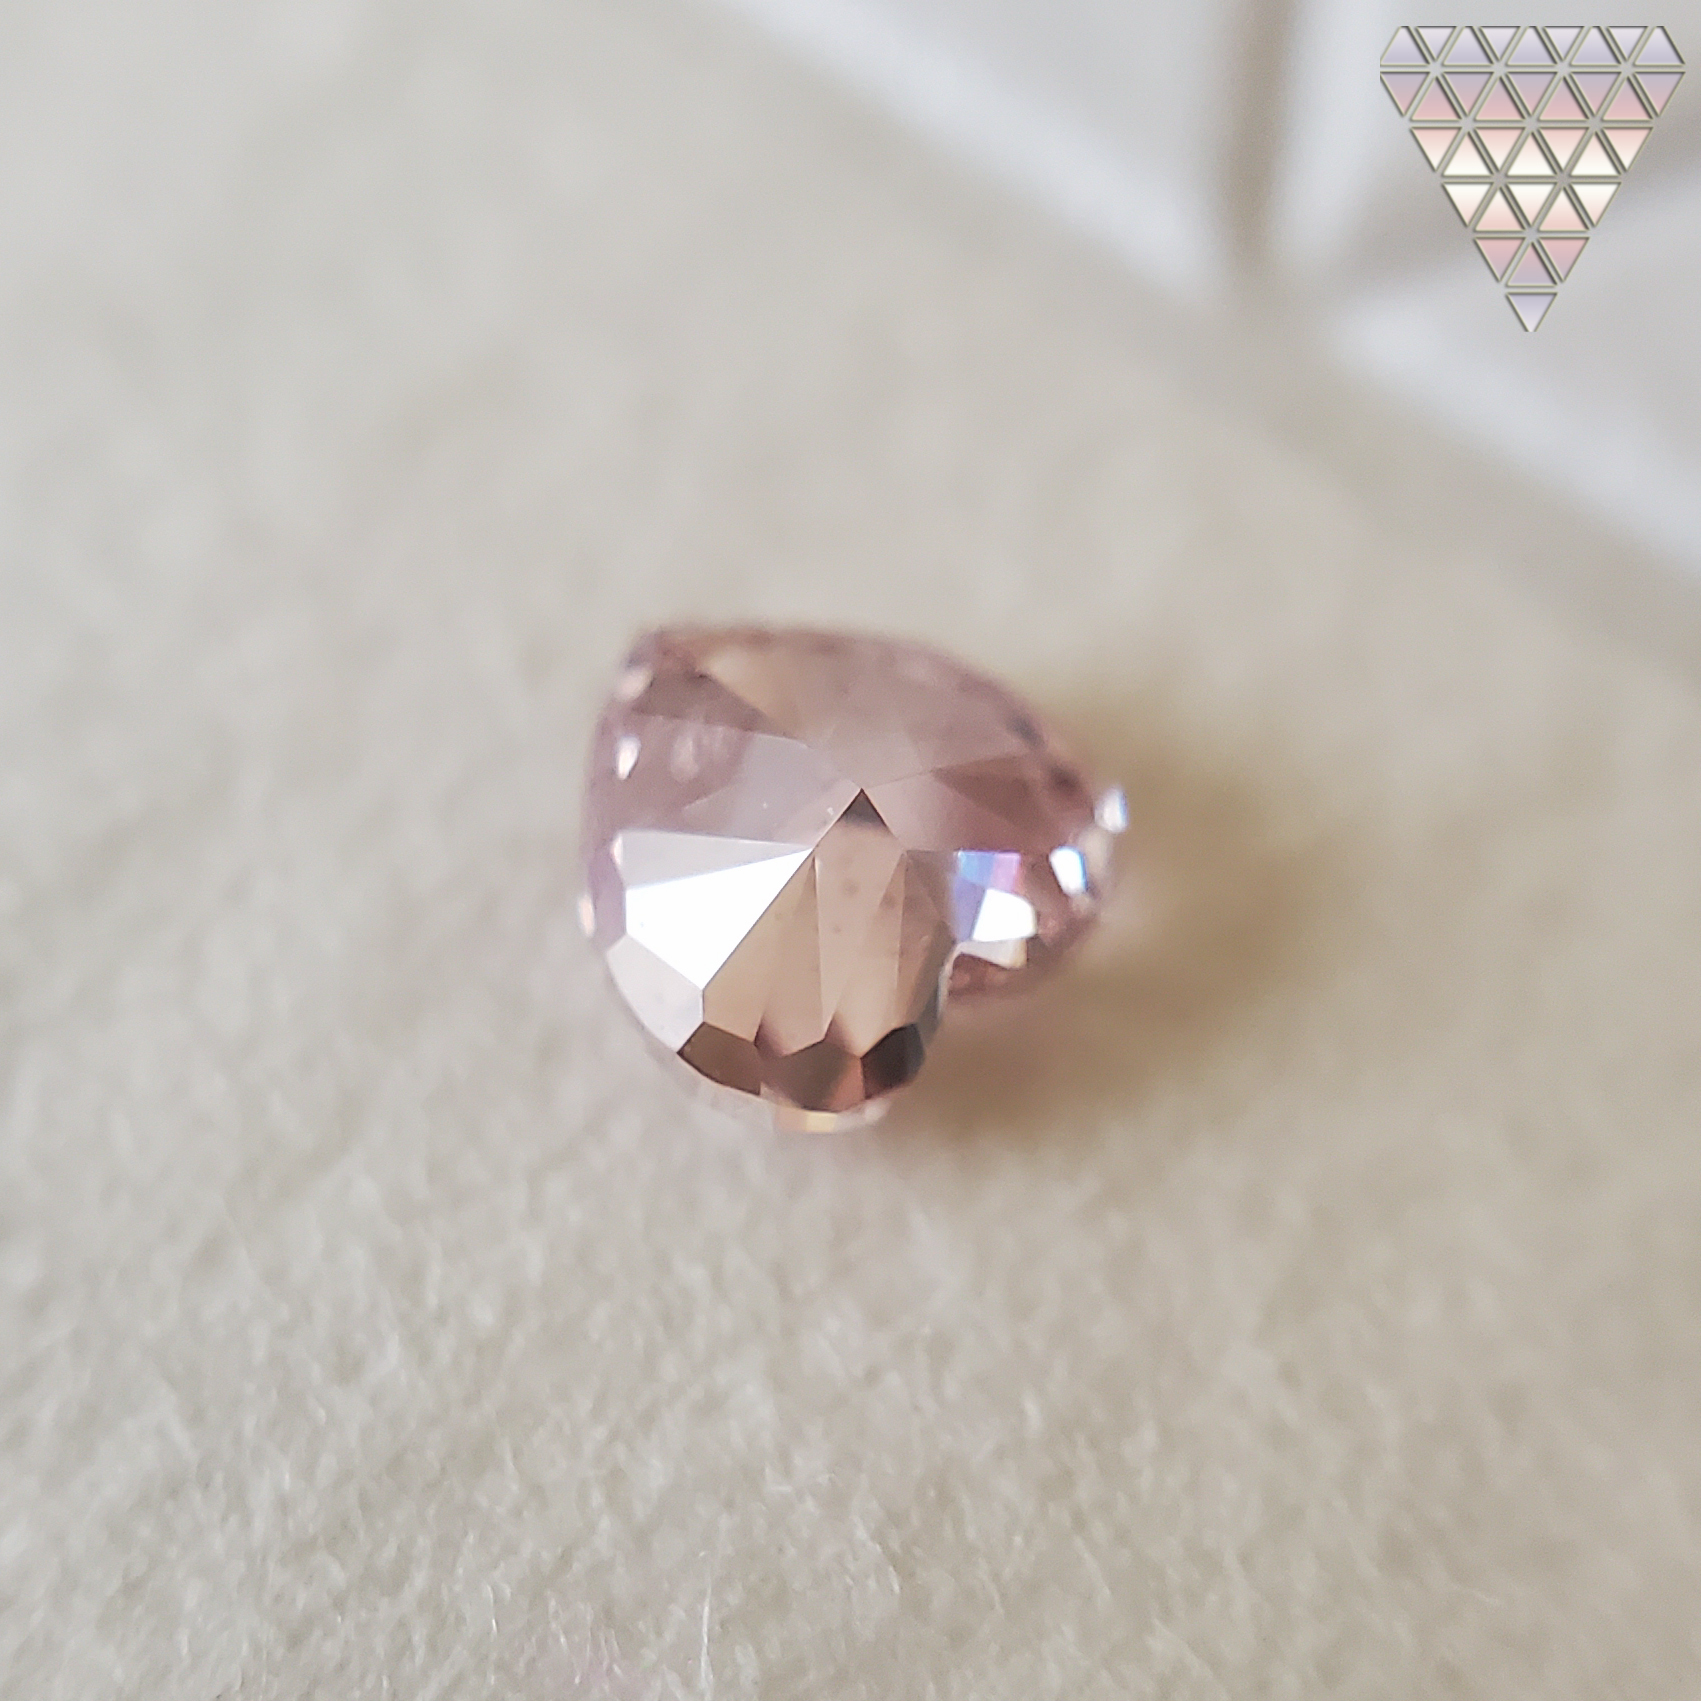 0.093 Ct Fancy Pink Si1 Heart AGT Japan Natural Loose Diamond Exchange Federation 4